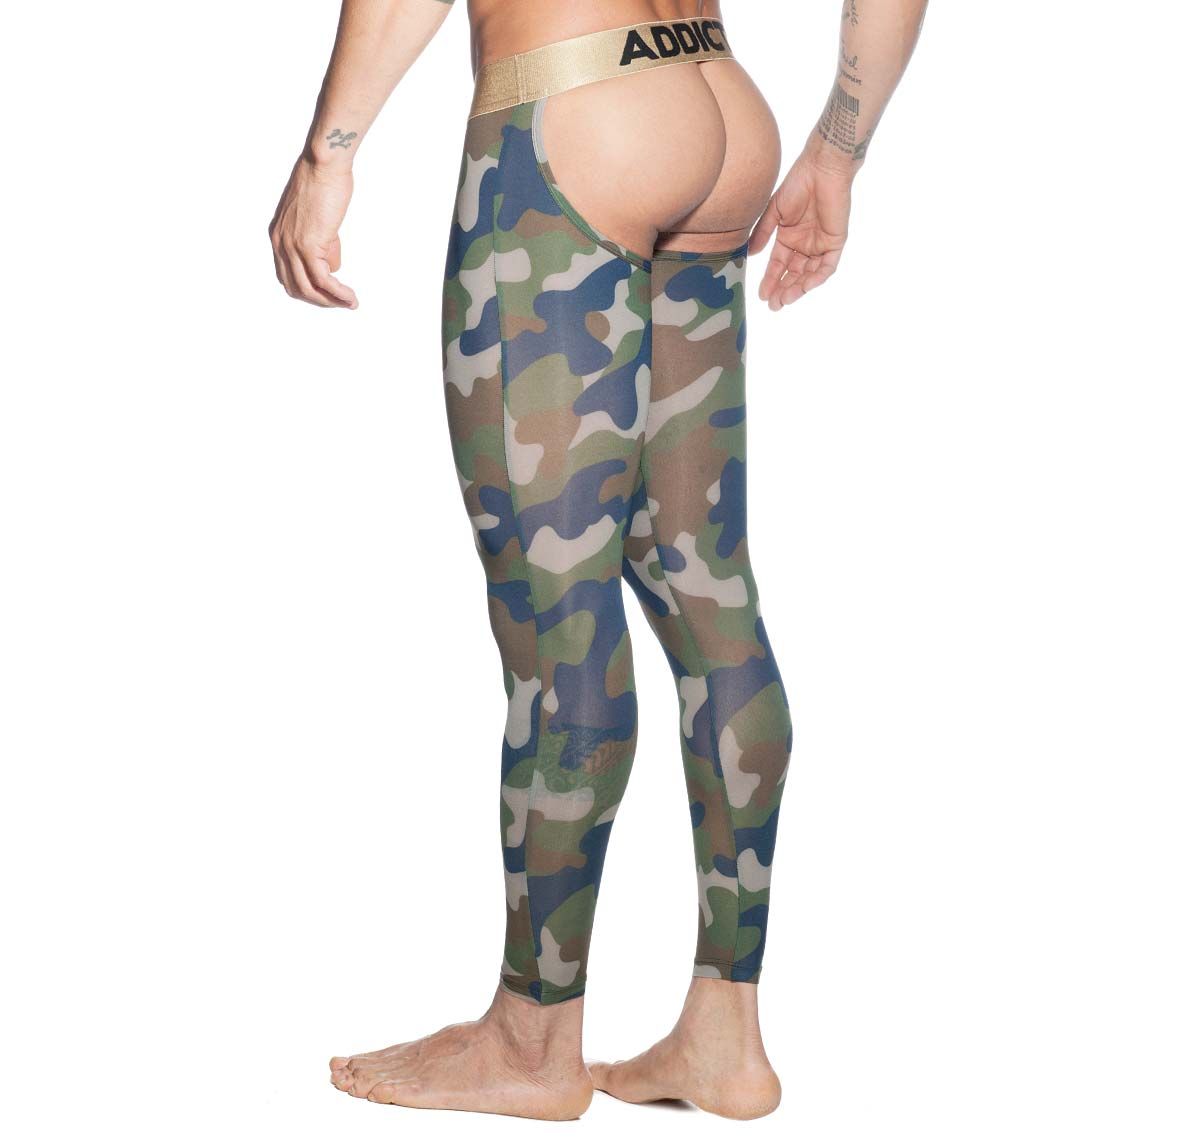 Addicted long underpants BOTTOMLESS CAMO LONG JOHN AD695, camouflage